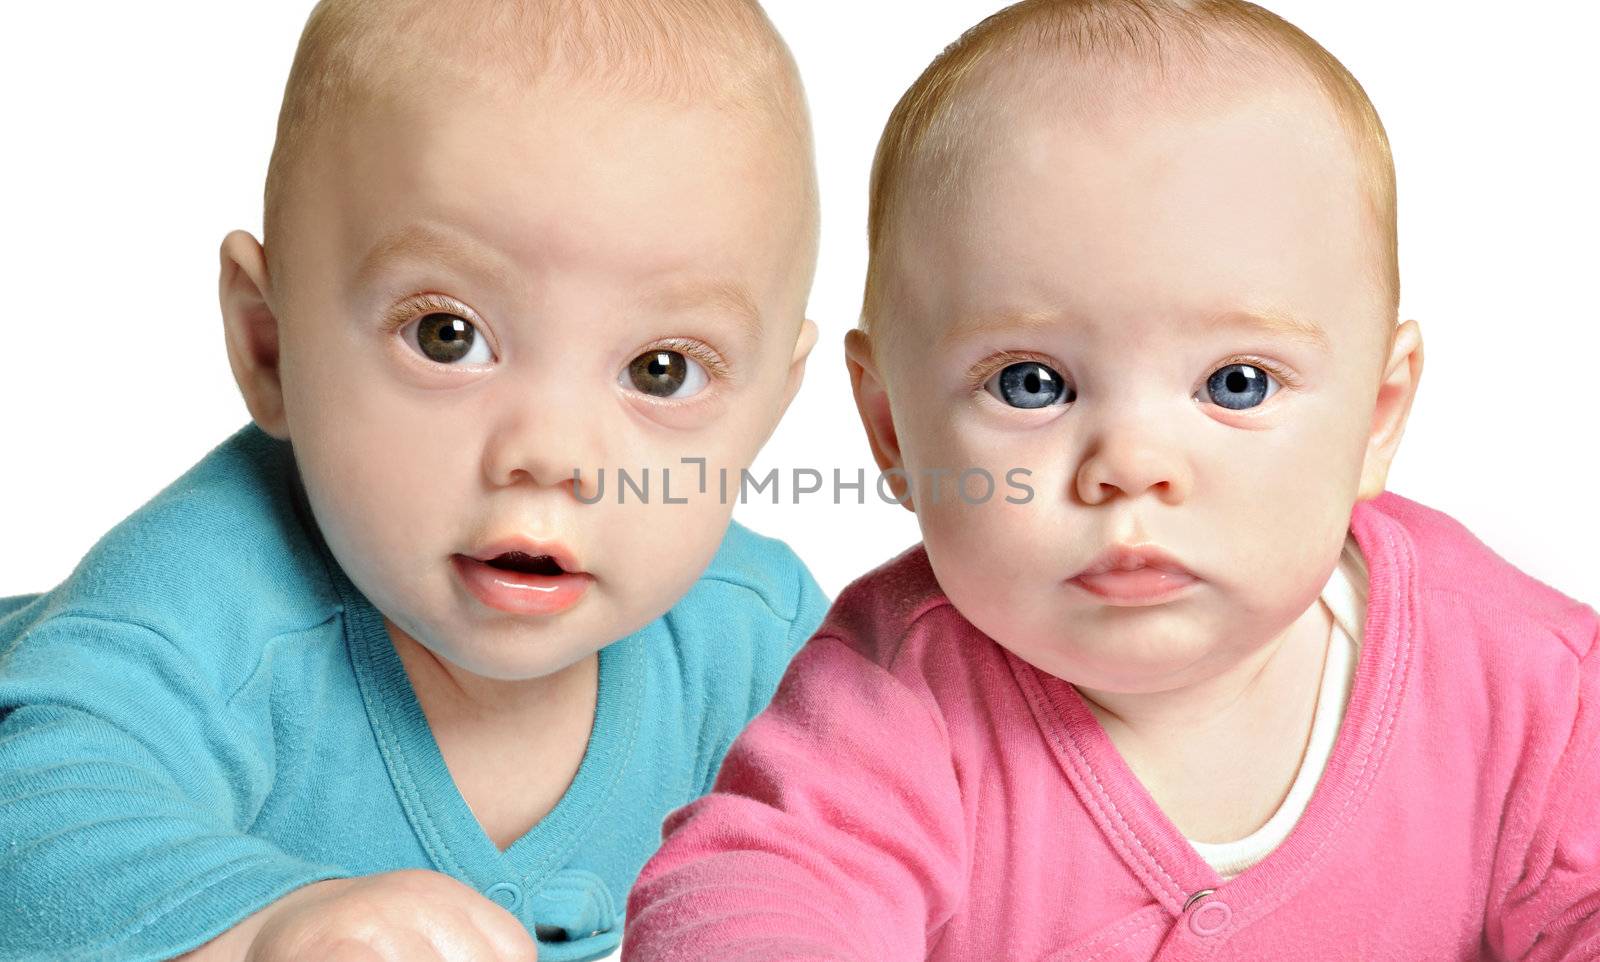 Six month old twin brother and sister by tish1